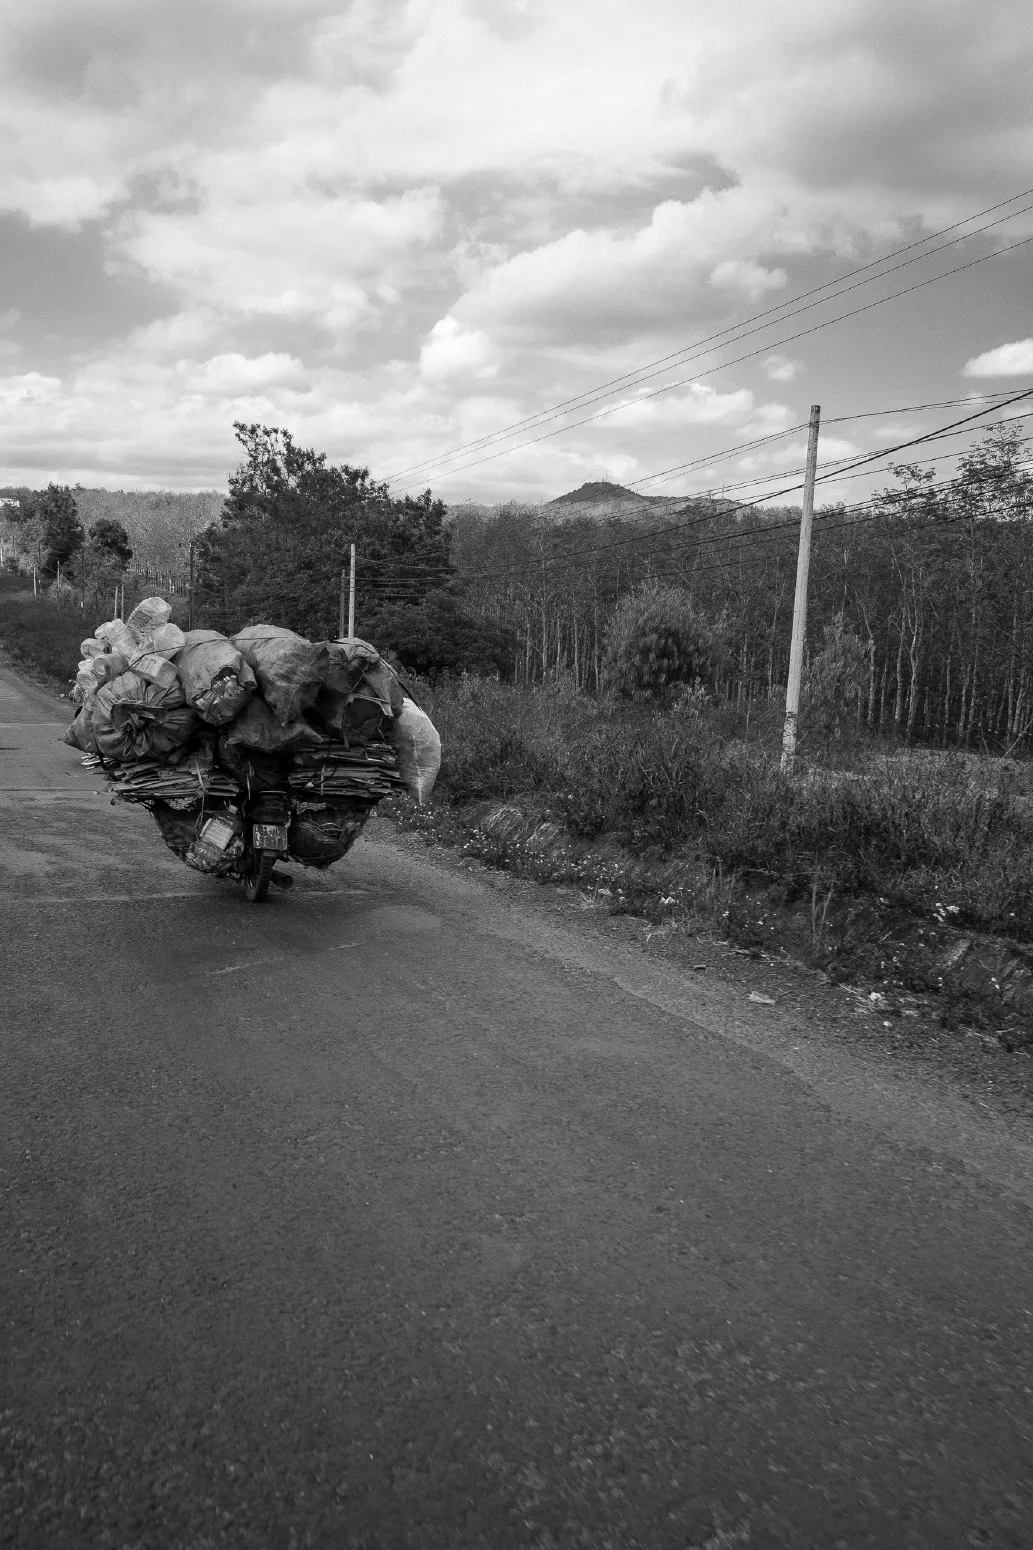 RECYCLE. Gia Lai Province, Vietnam